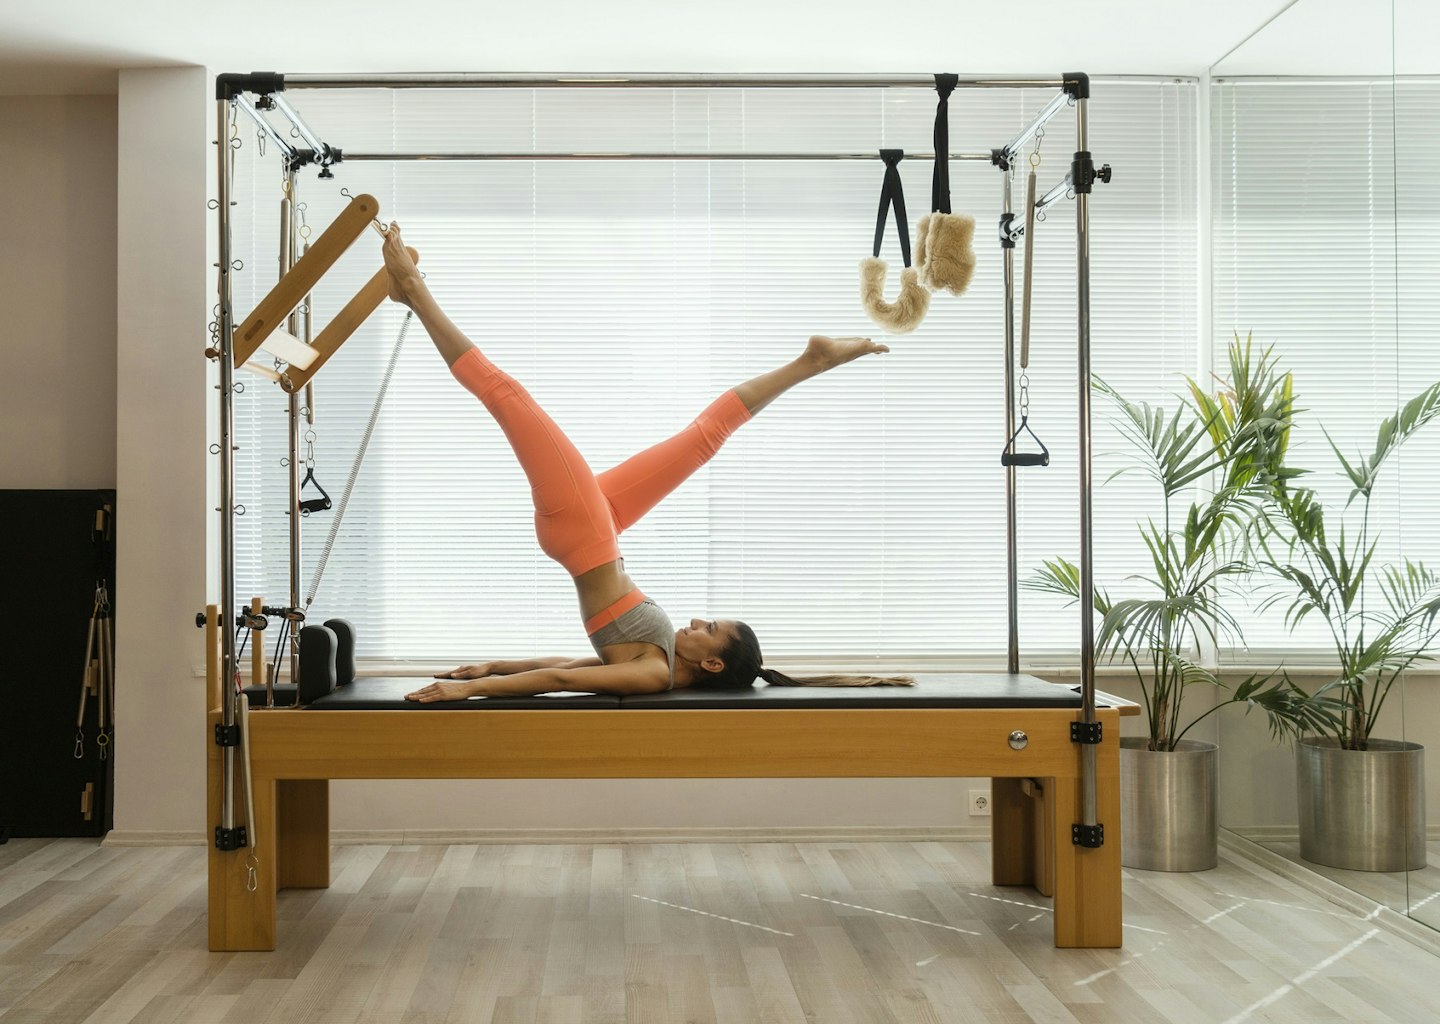 Pilates for beginners Videos : A Guide To Beginner Pilates